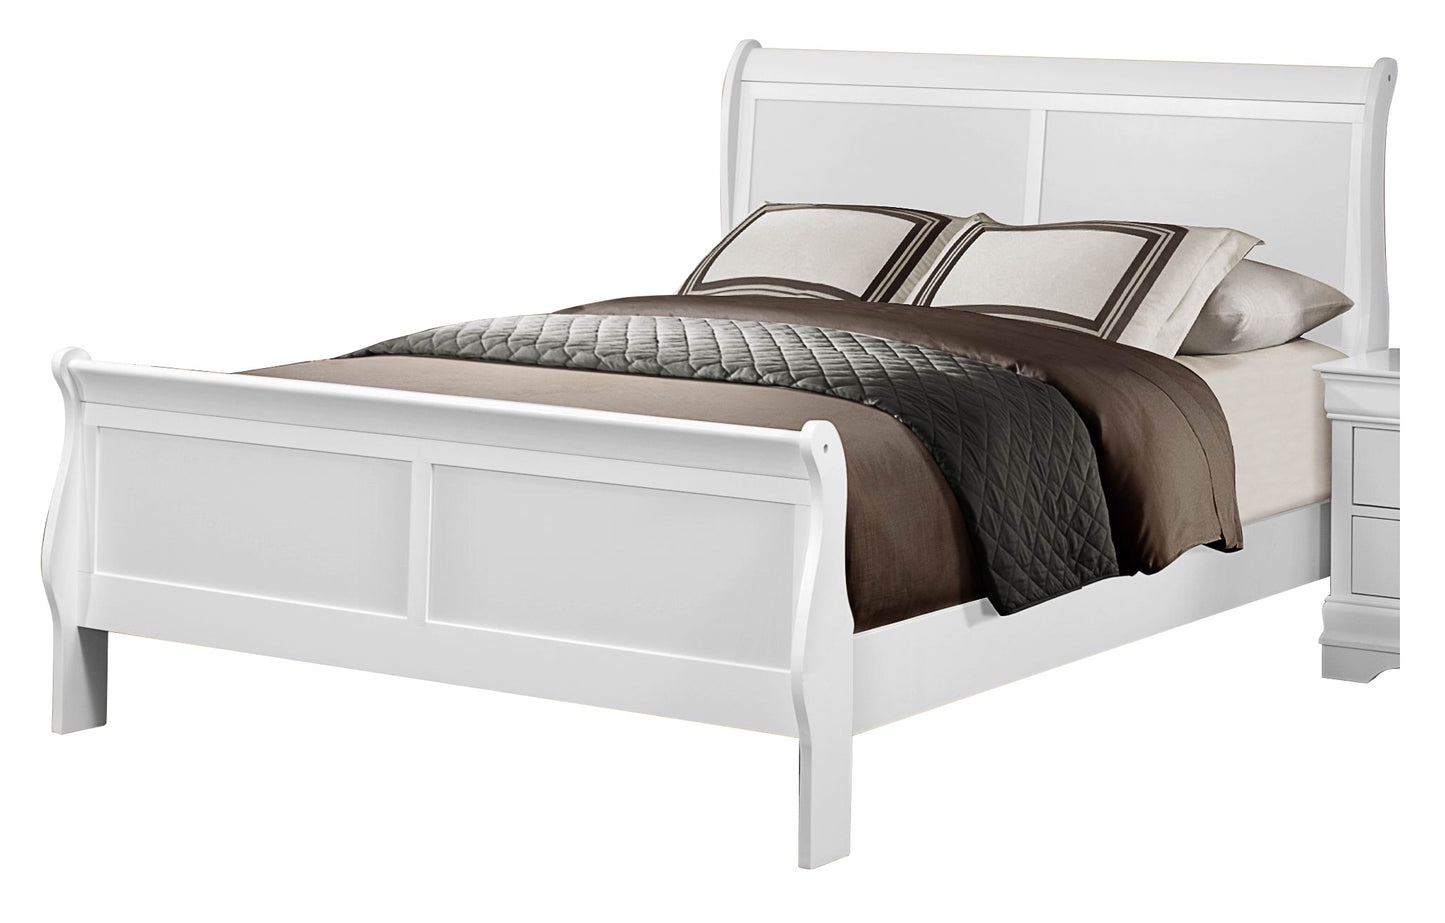 Manburg Louis Philippe 5PC Bedroom Set E King Sleigh Bed, Dresser, Mirror, 2 Nightstand in Burnished White